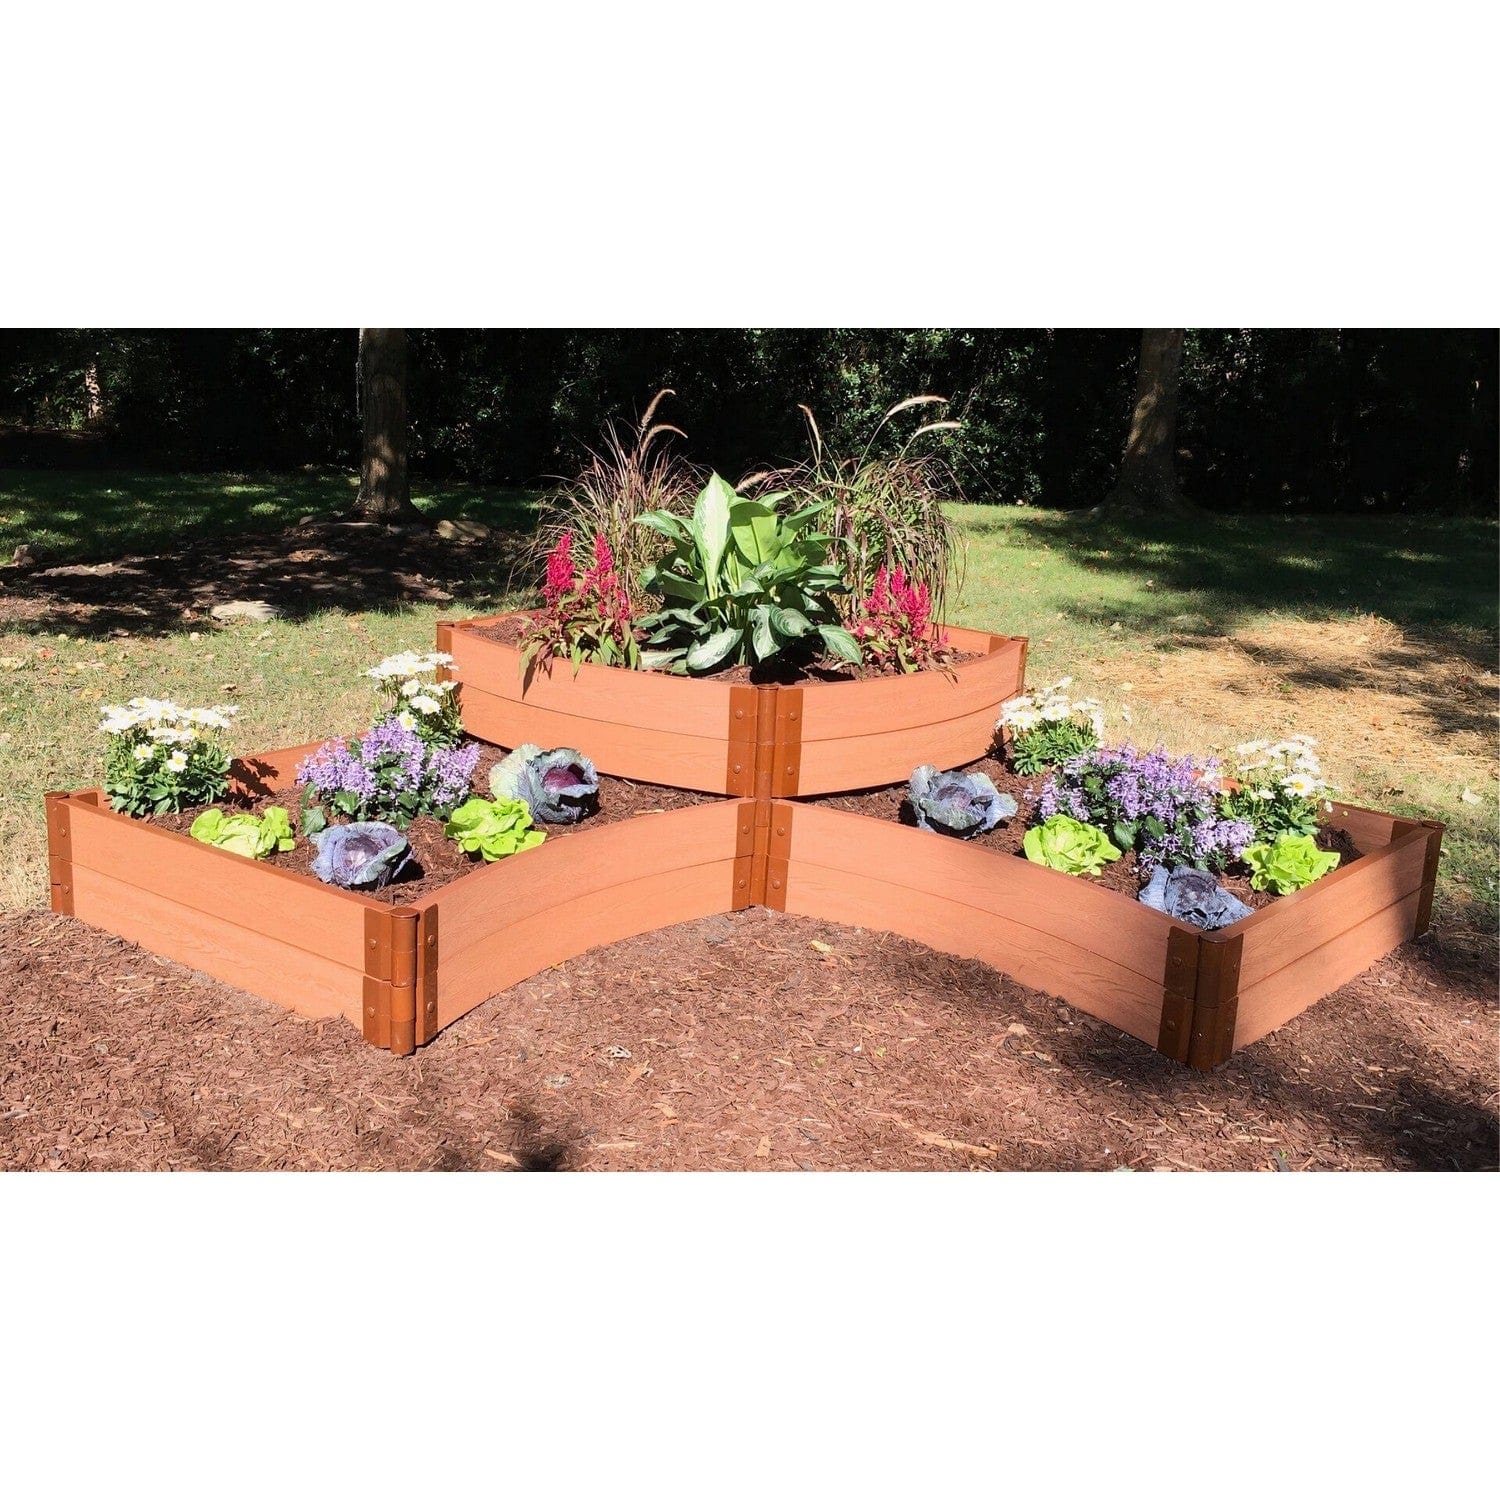 Frame It All Gardening Accessories Frame It All | Tool-Free Teardrop Curved Corner Raised Garden Bed (2-Tier) 8' X 8' X 5.5" - Classic Sienna - 2" Profile 800001009